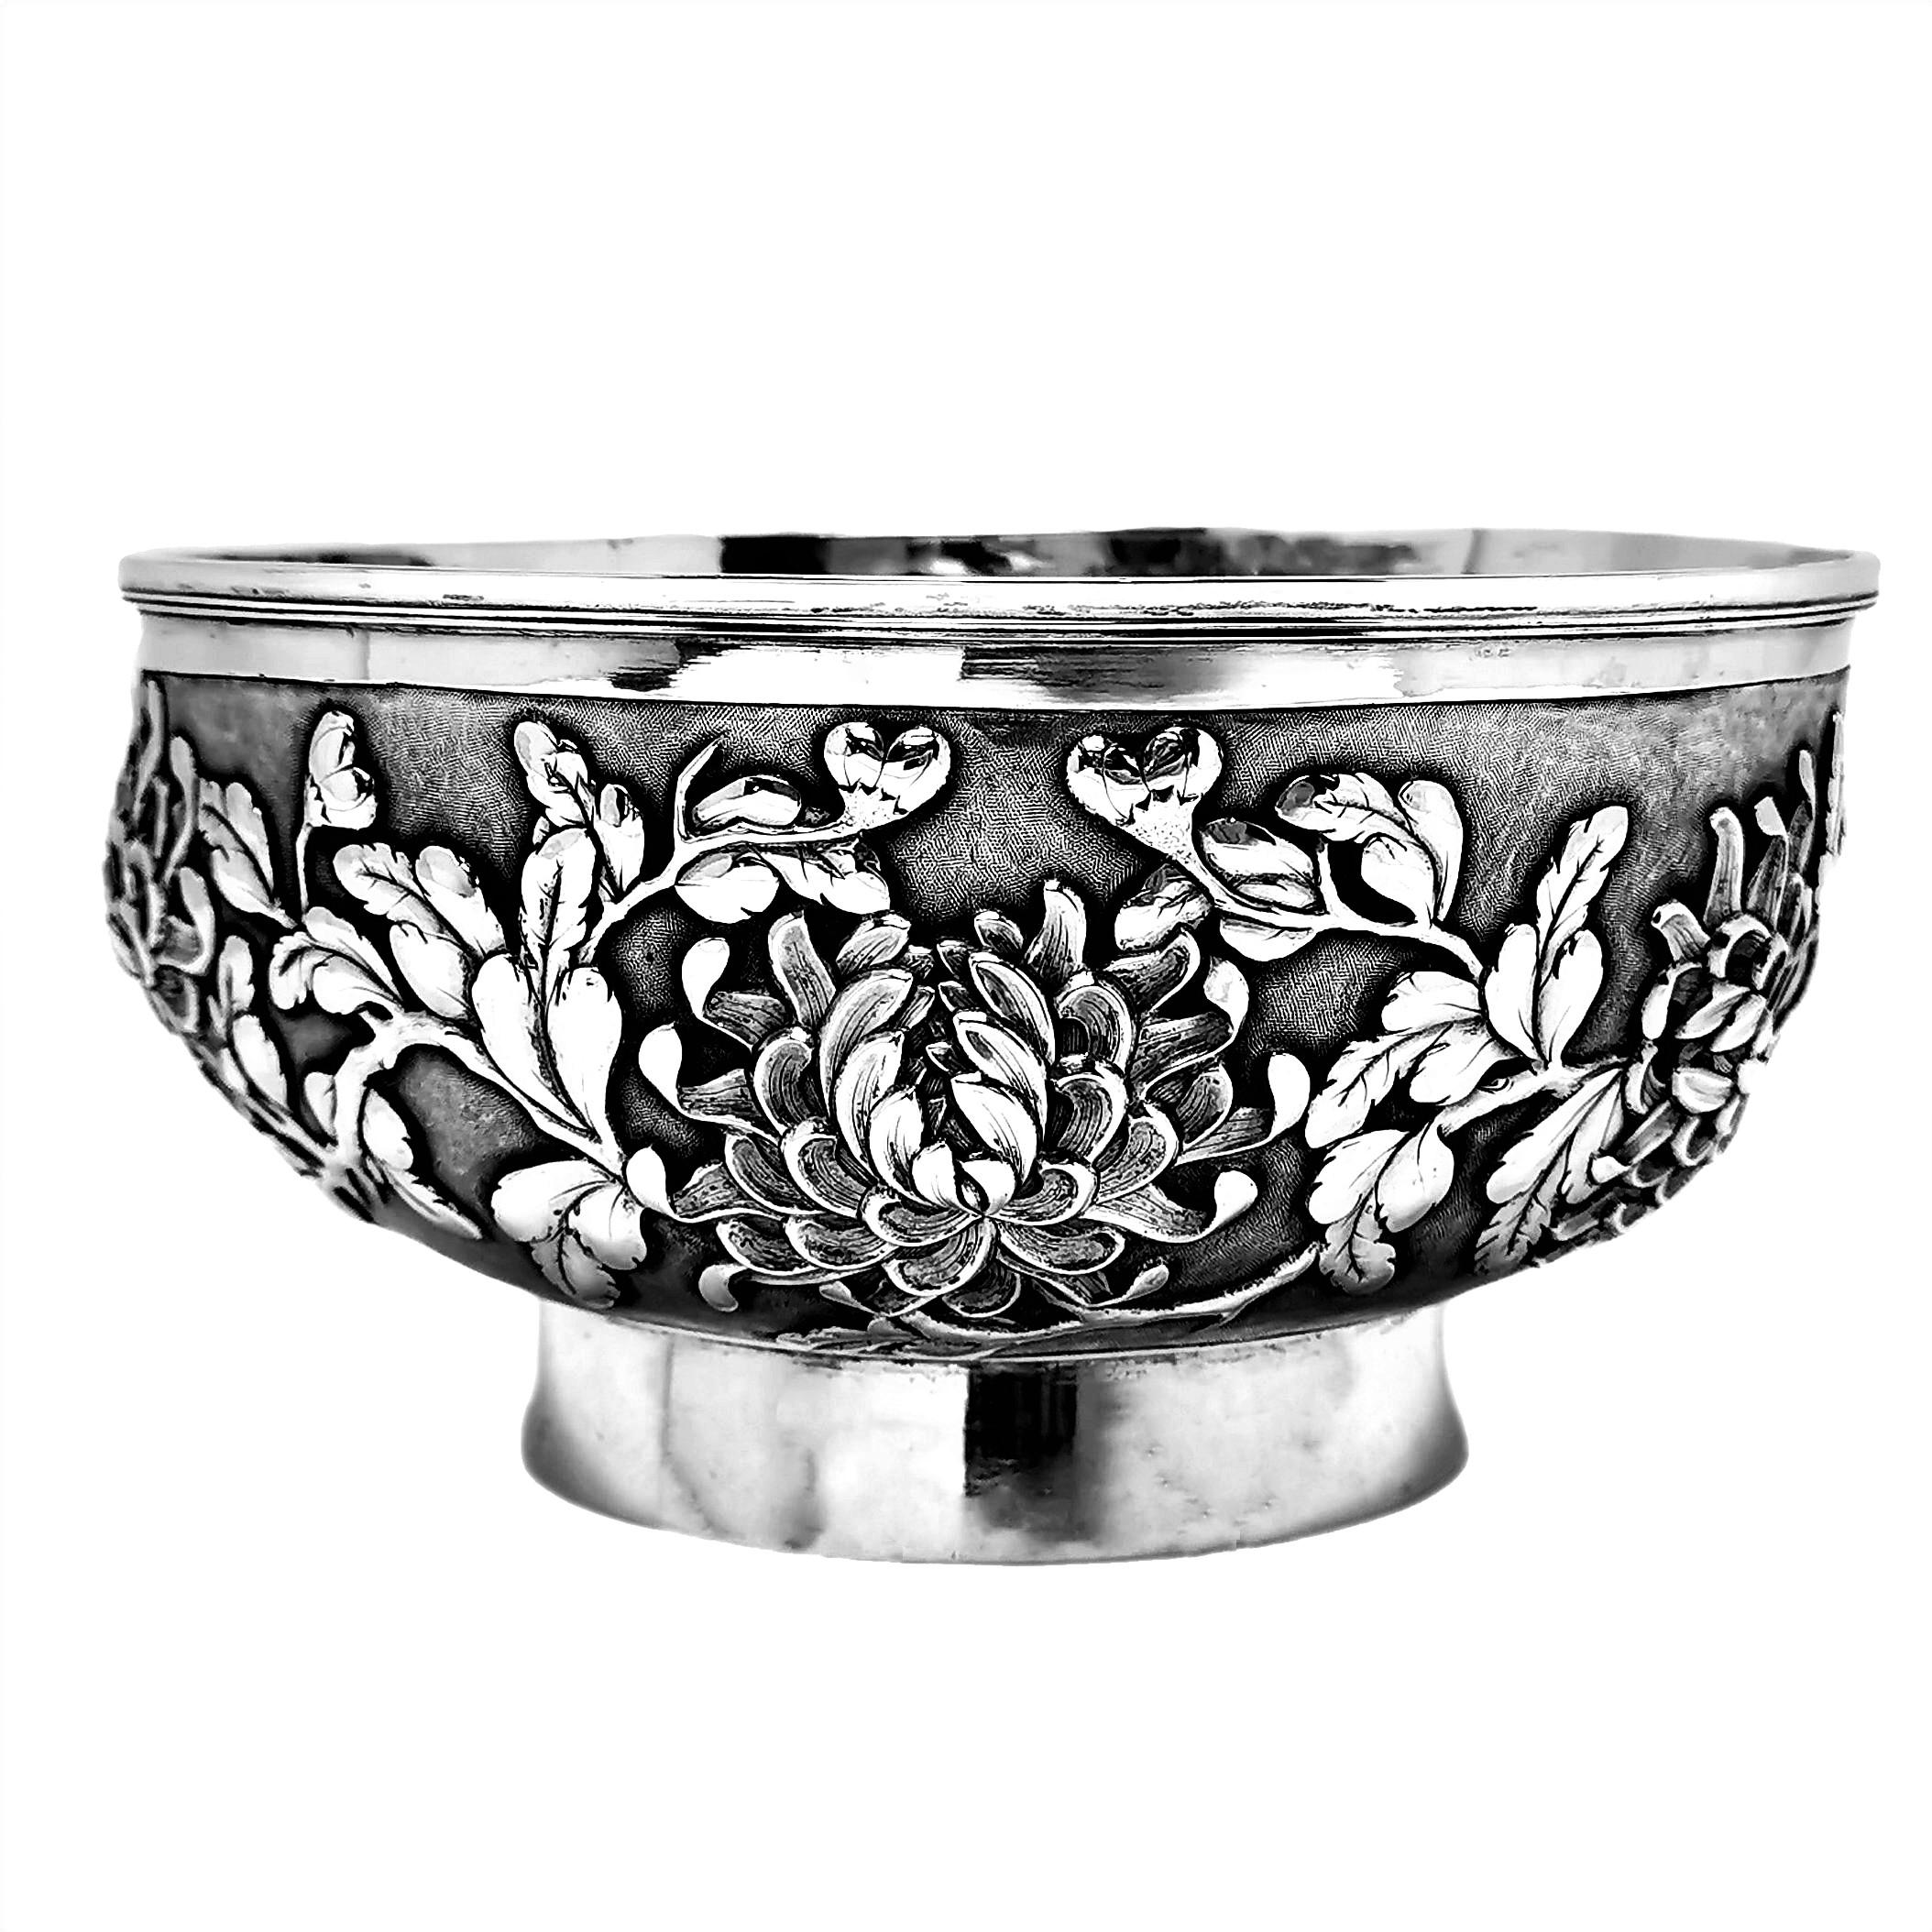 A beautiful Antique 19th Century Chinese Silver Bowl embellished with deeply chased stylised chrysanthemums around the entire body of the bowl. The Bowl stands on a round foot.

This Bowl was made in c. 1890 in Shanghai, China by important Chinese